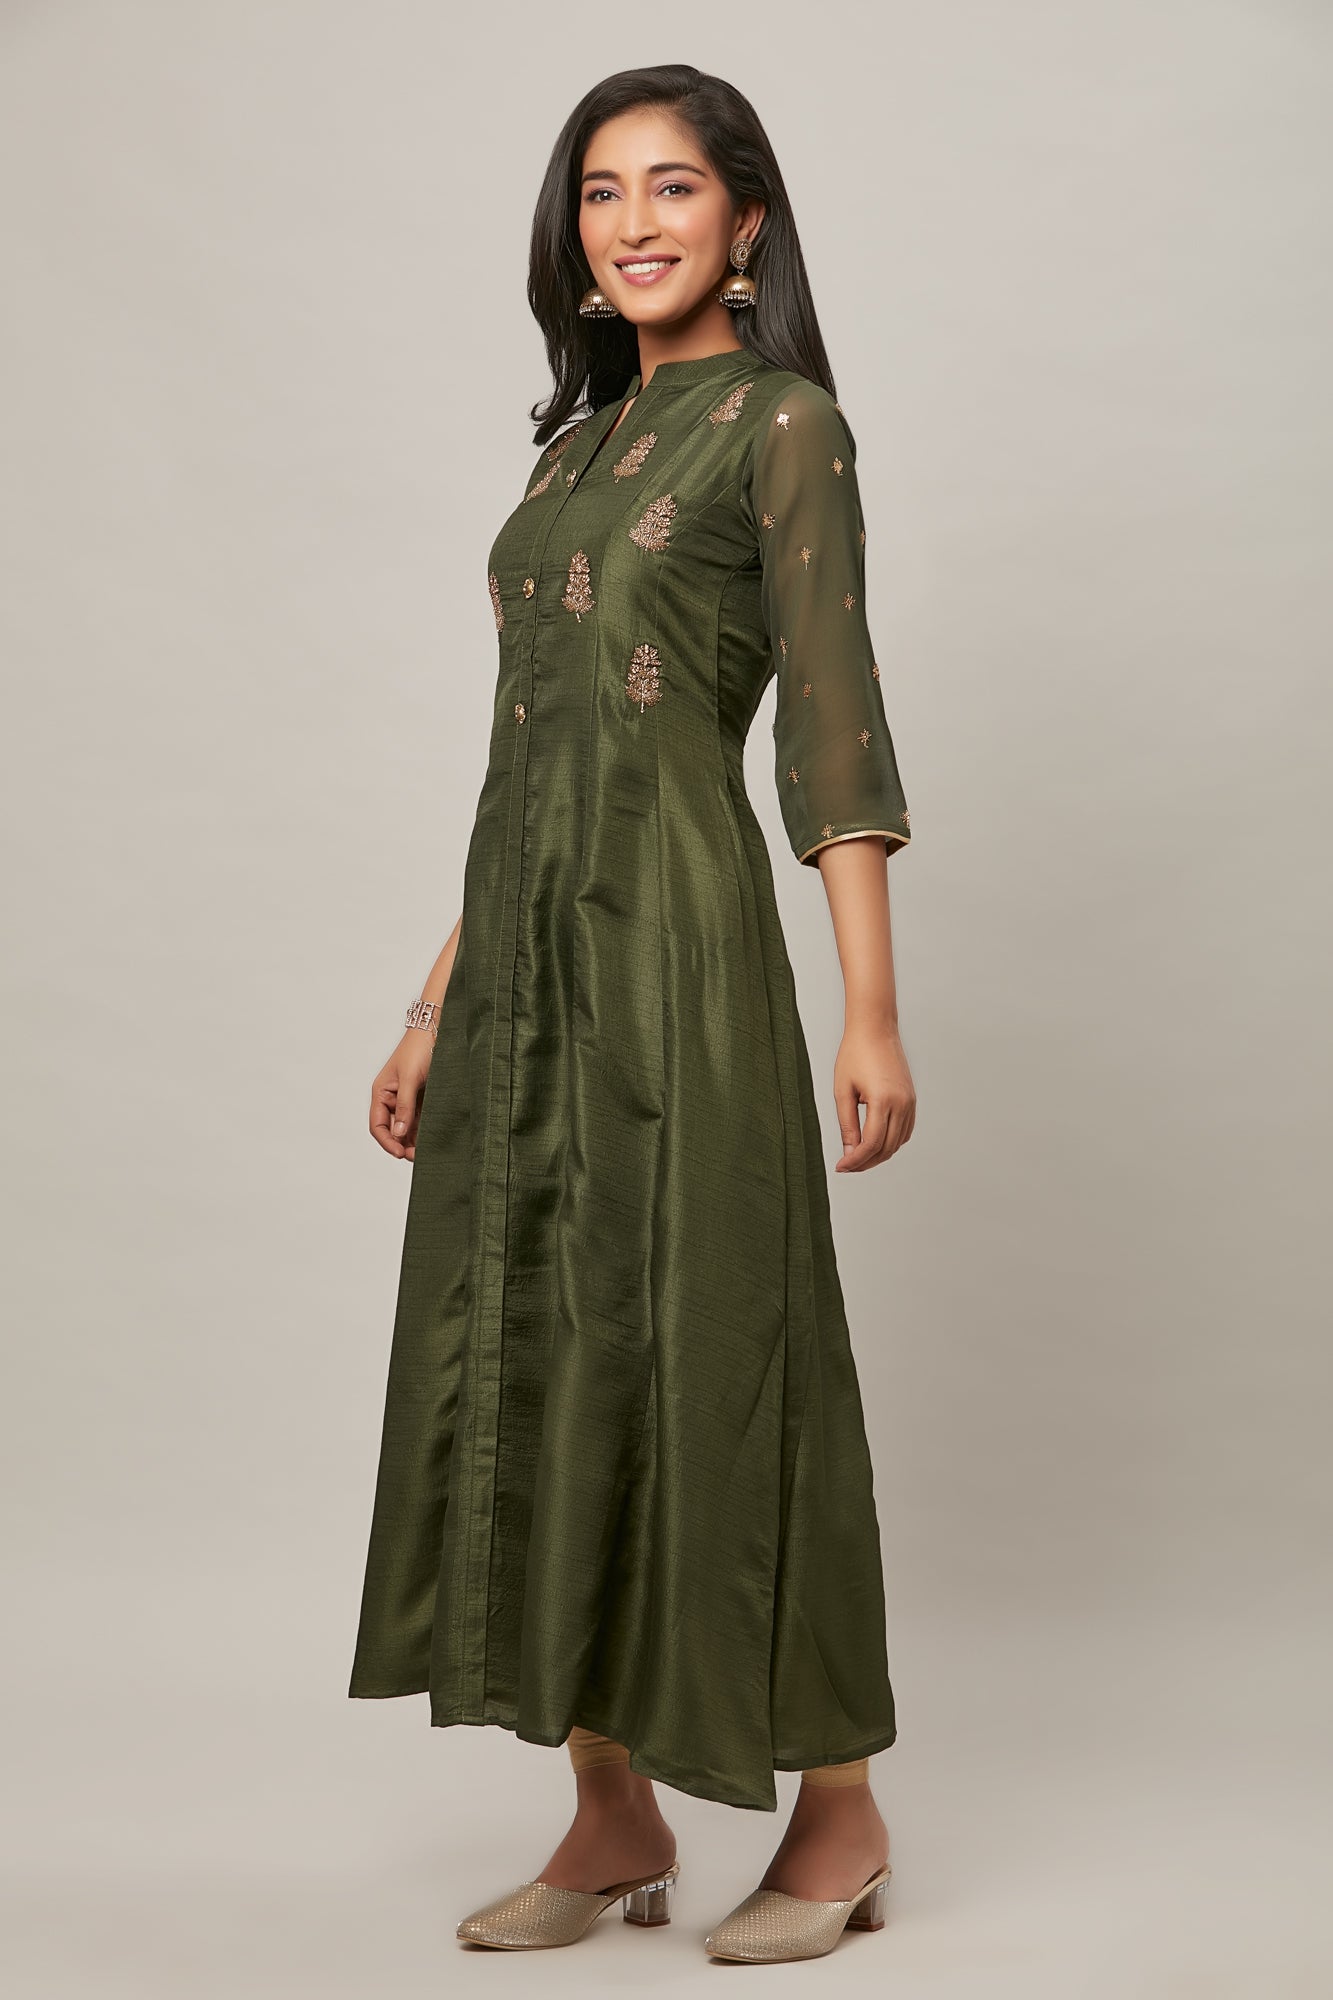 Urban Mystic Olive Green Colored Long Flared Party Wear Kurta